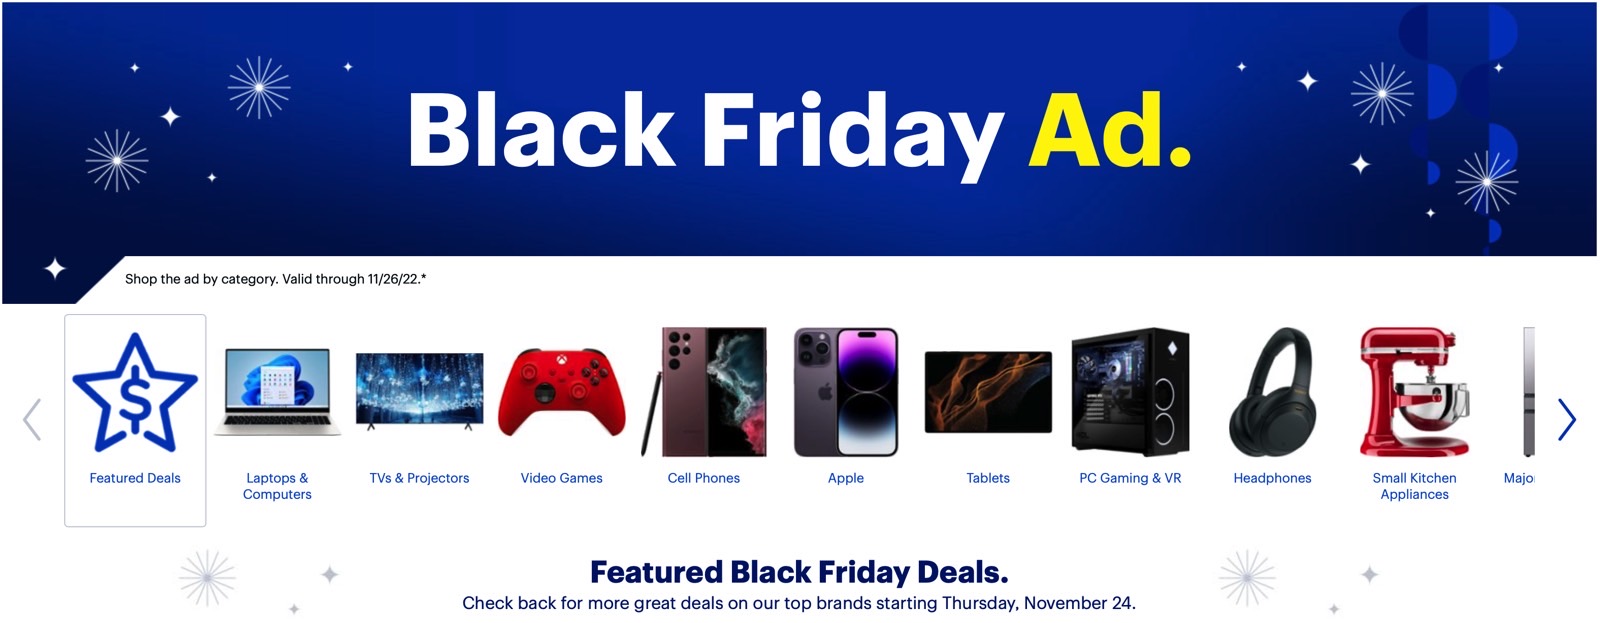 Best Buy Black Friday ad 2022 Deals on iPhone 14, AirPods, TVs, more